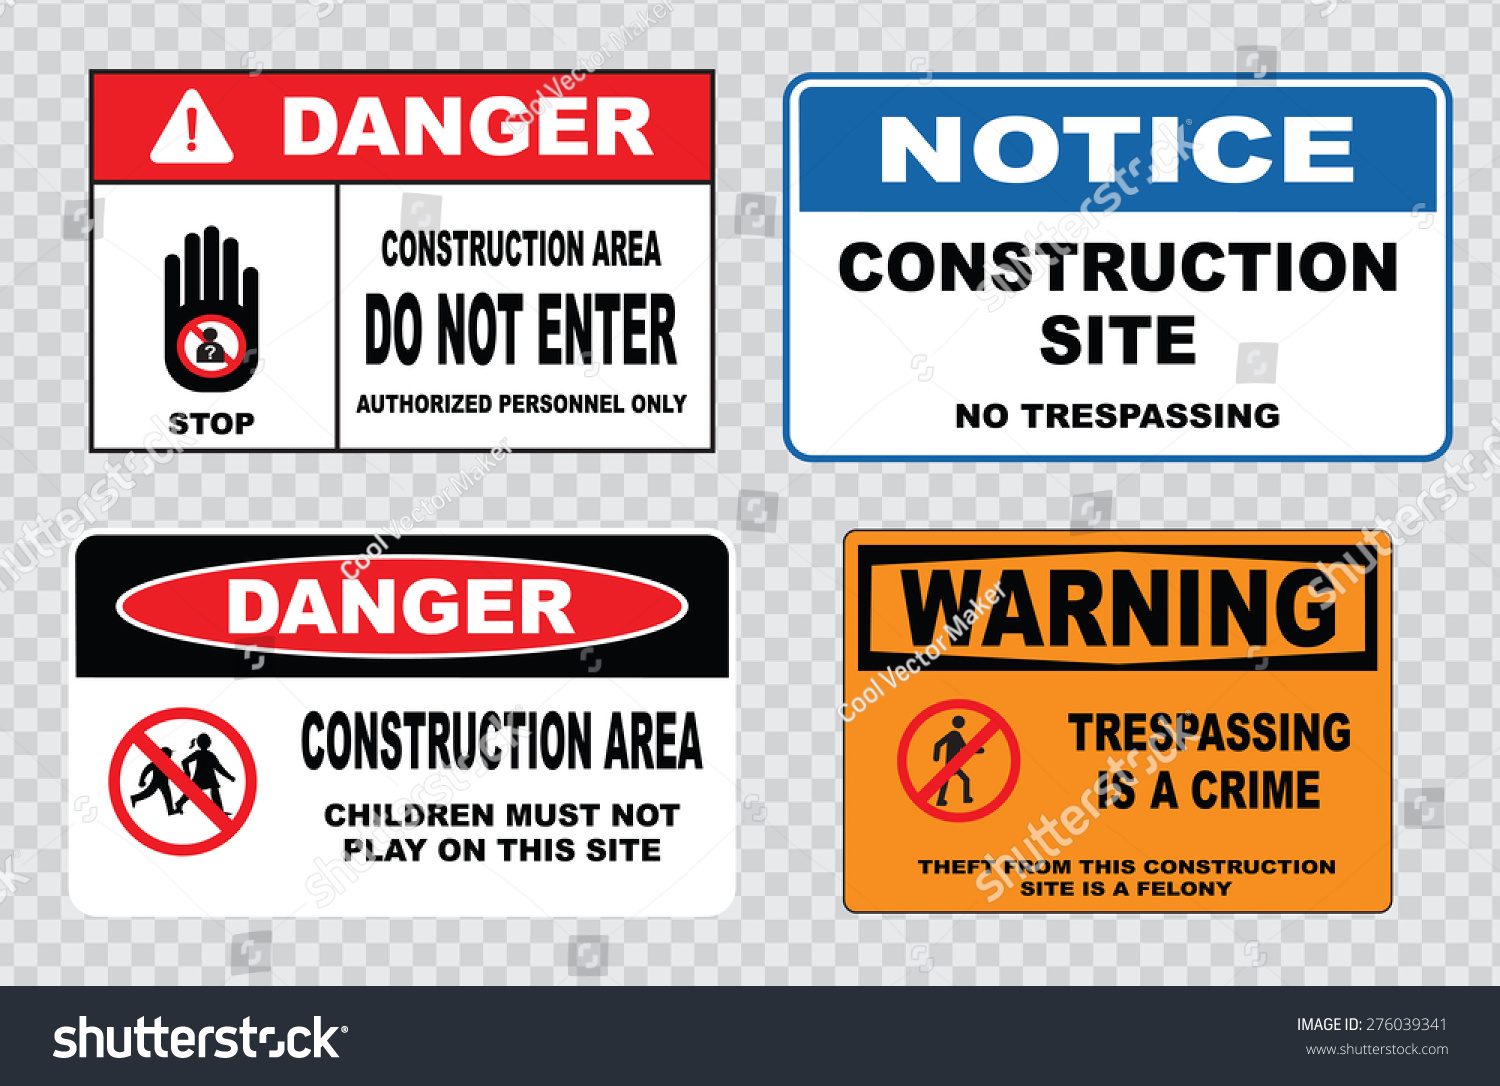 Site Safety Sign Construction Safety Danger Stock Vector (Royalty Free ...